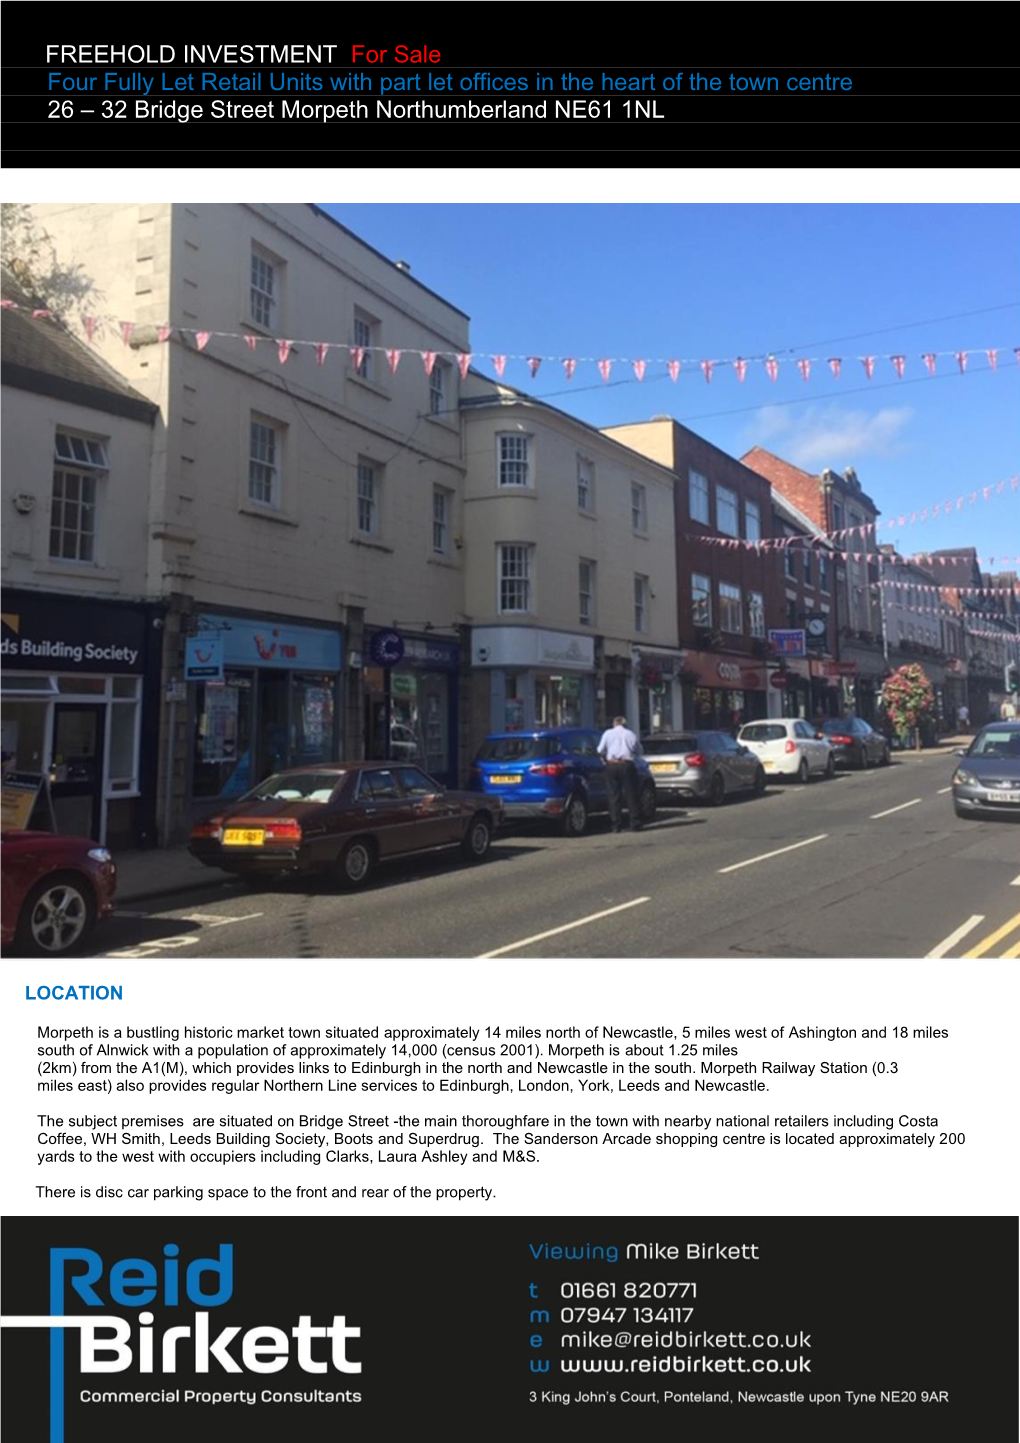 FREEHOLD INVESTMENT for Sale Four Fully Let Retail Units with Part Let Offices in the Heart of the Town Centre 26 – 32 Bridge Street Morpeth Northumberland NE61 1NL